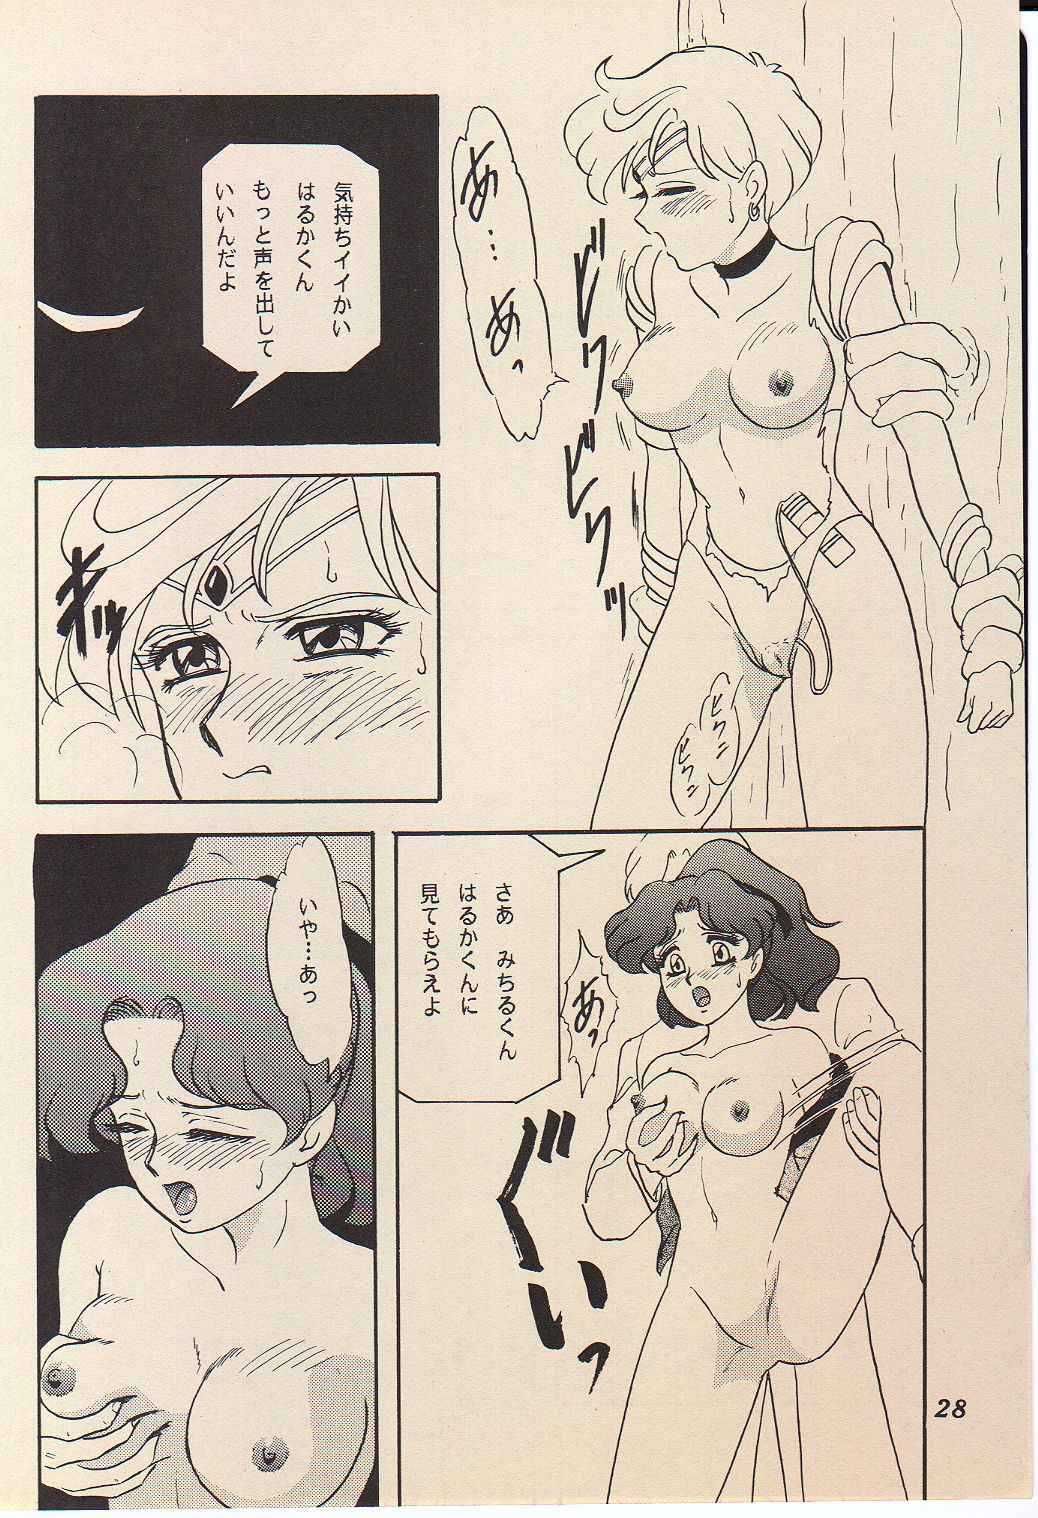 Twinkle Twinkle Outer Senshi (Neptune &amp; Uranus) Doujinshi Gallery Twinkle Twinkle Outer Senshi (Neptune &amp; Uranus) Doujinshi Gallery